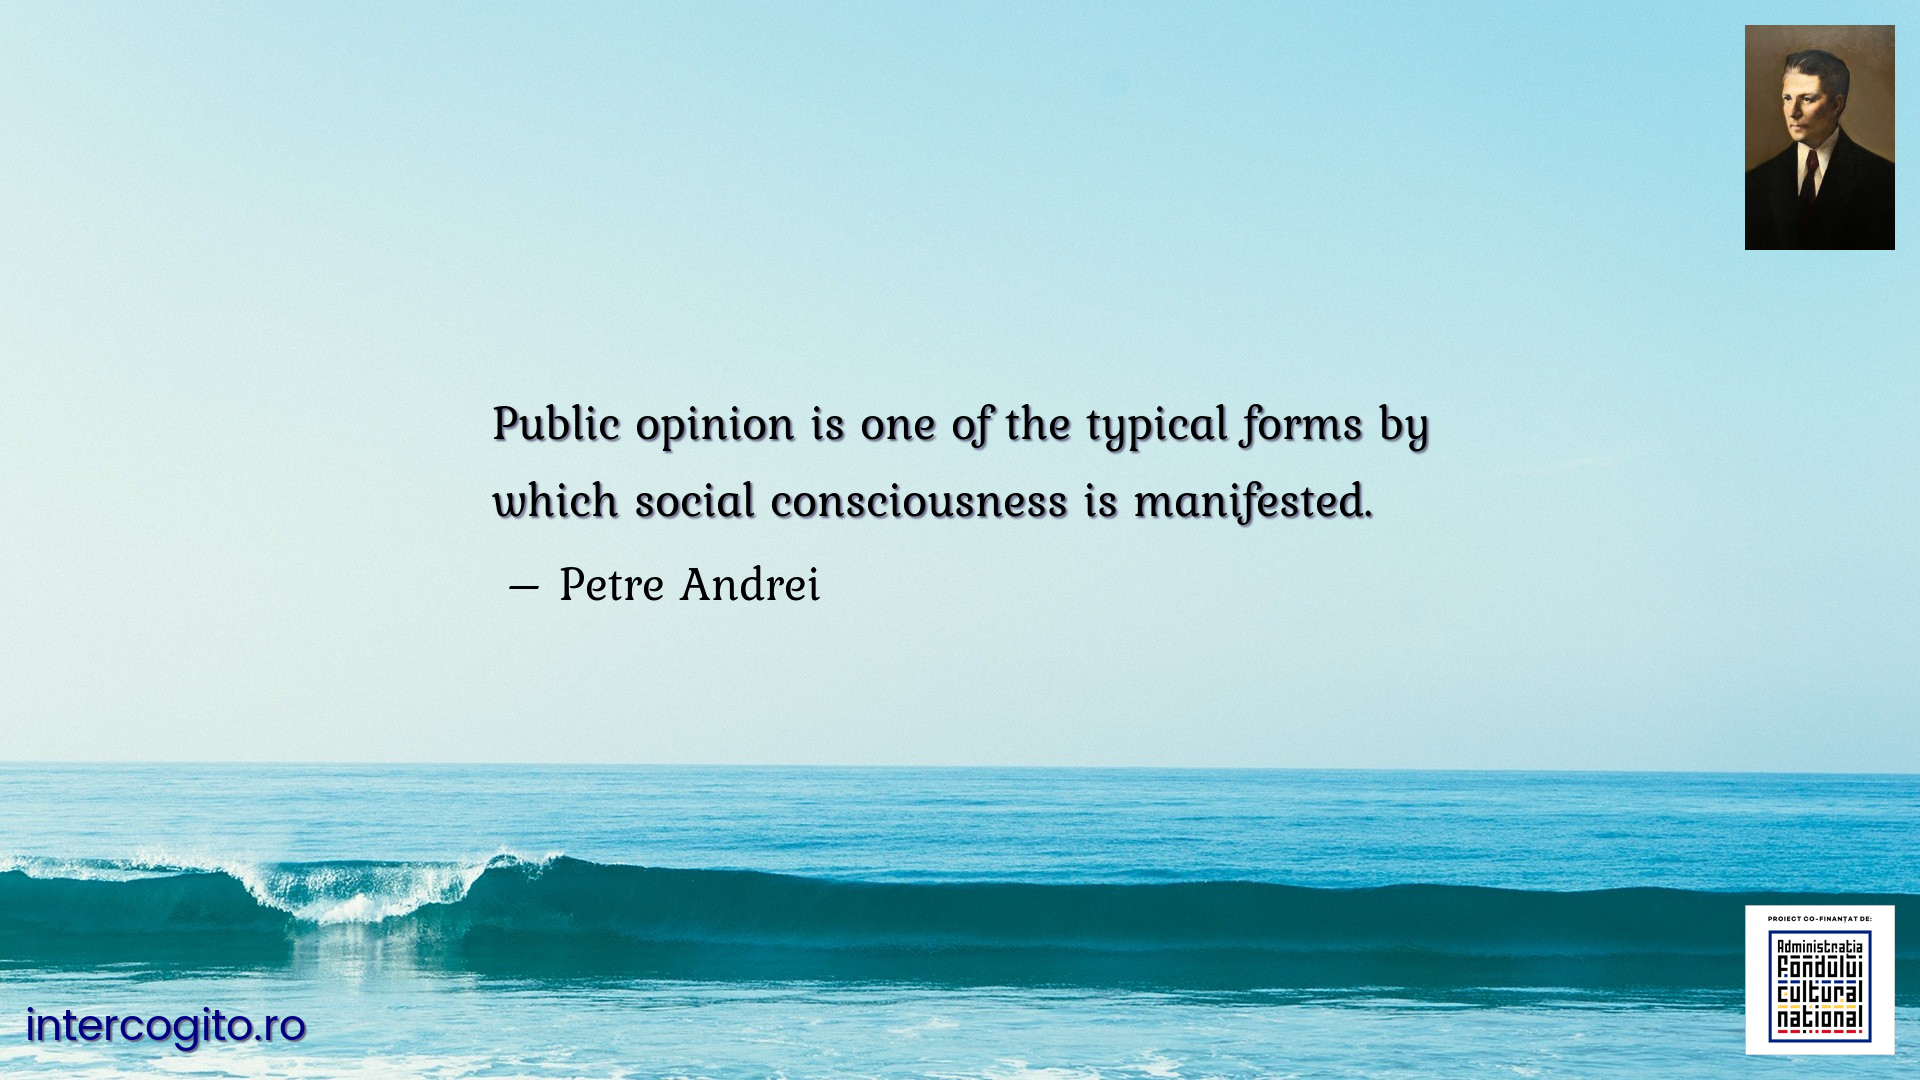 Public opinion is one of the typical forms by which social consciousness is manifested.